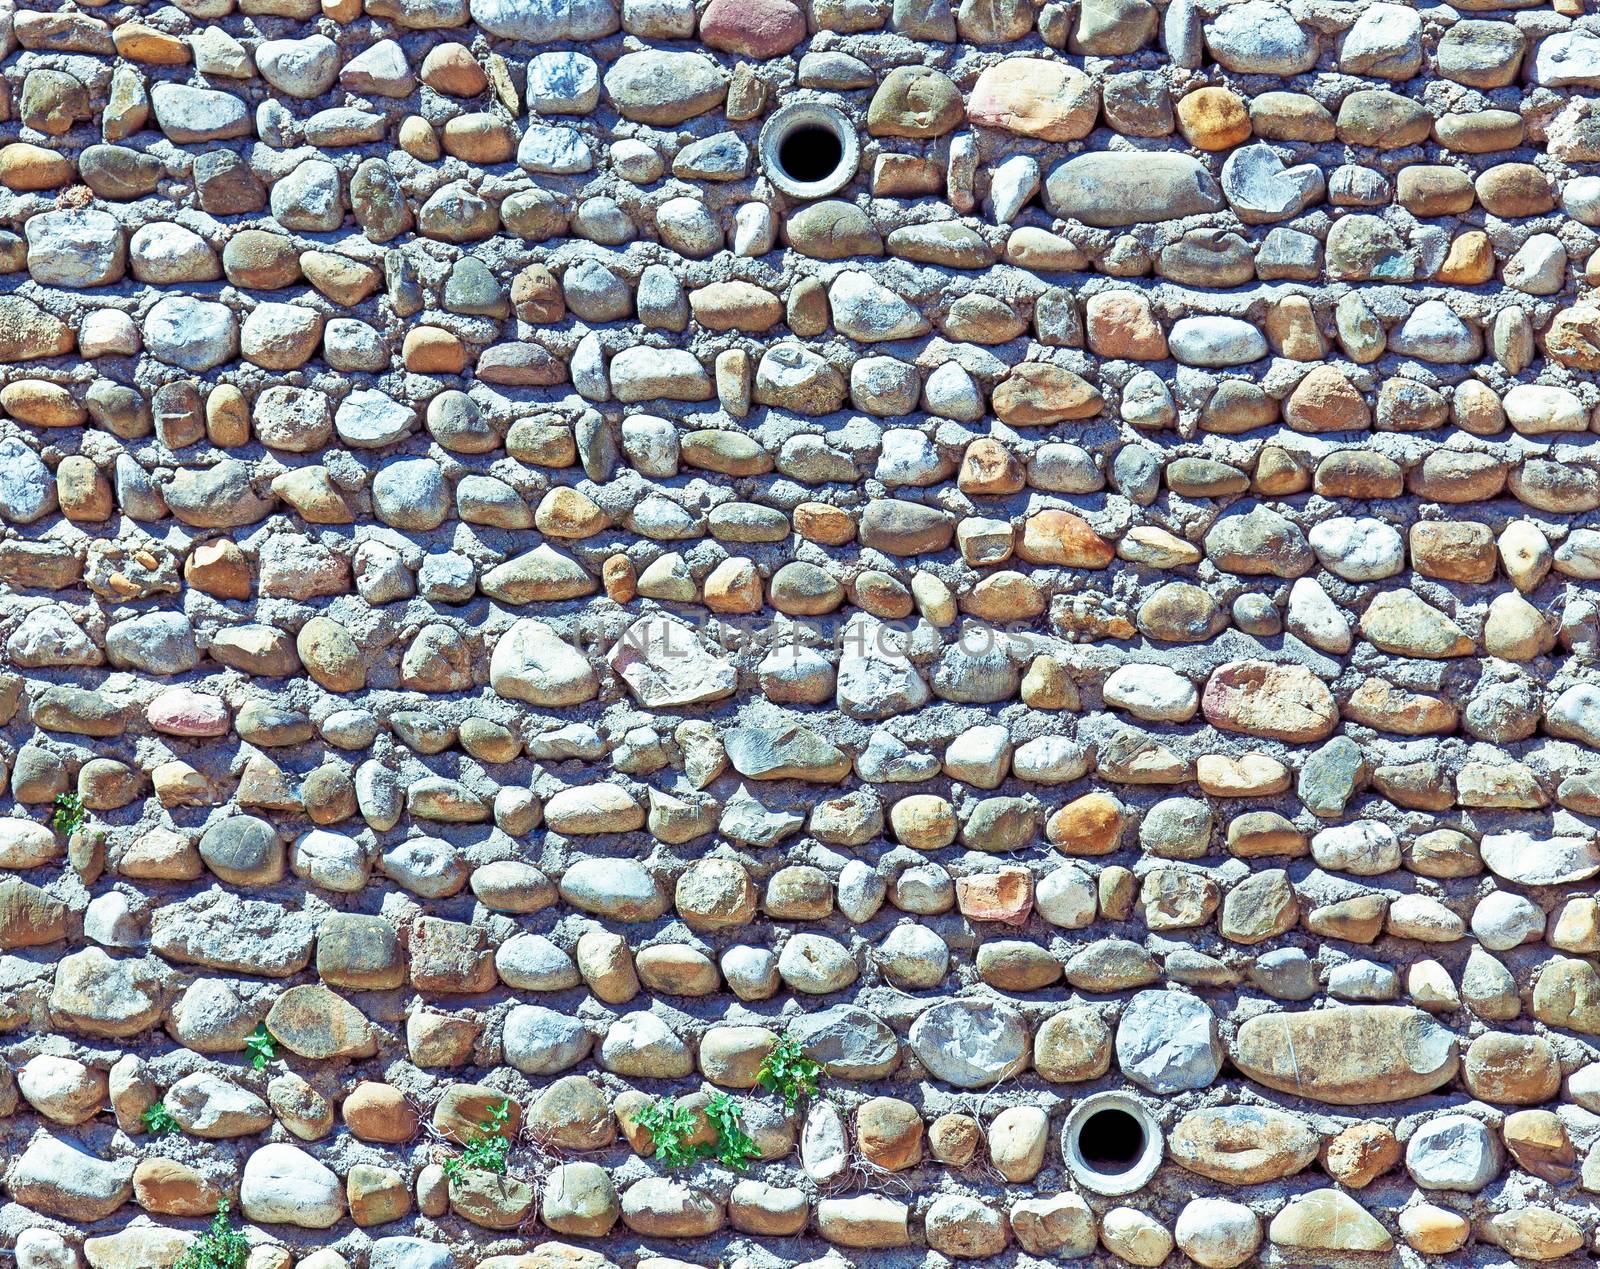  stone wall texture photo by vicnt